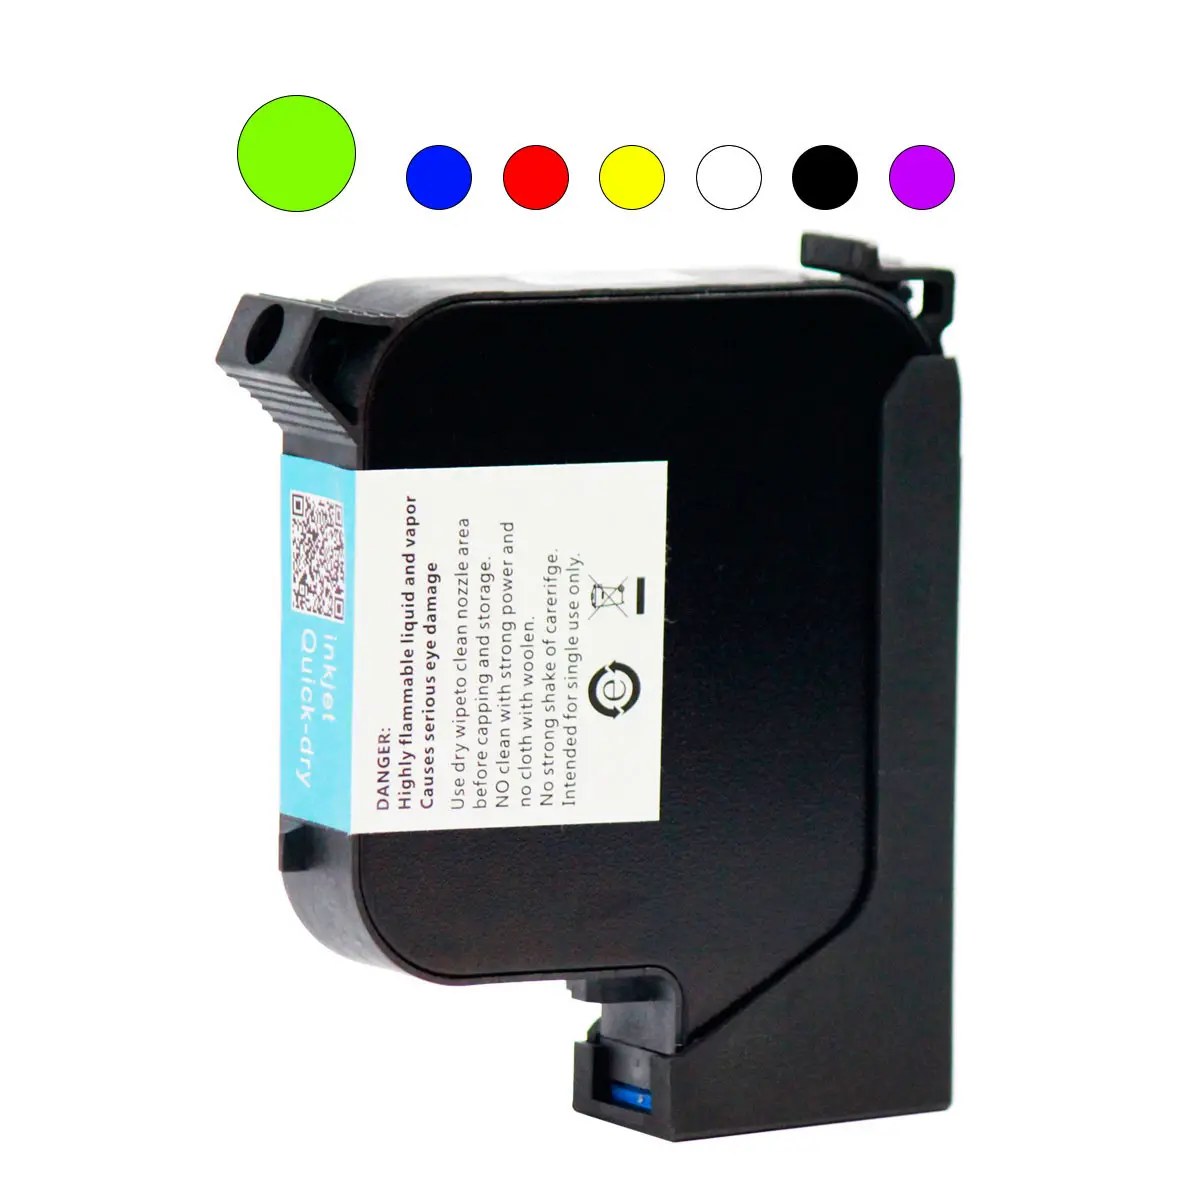 Black white red yellow blue green quick dry inkjet printer ink cartridge with TIJ2.5 original imported